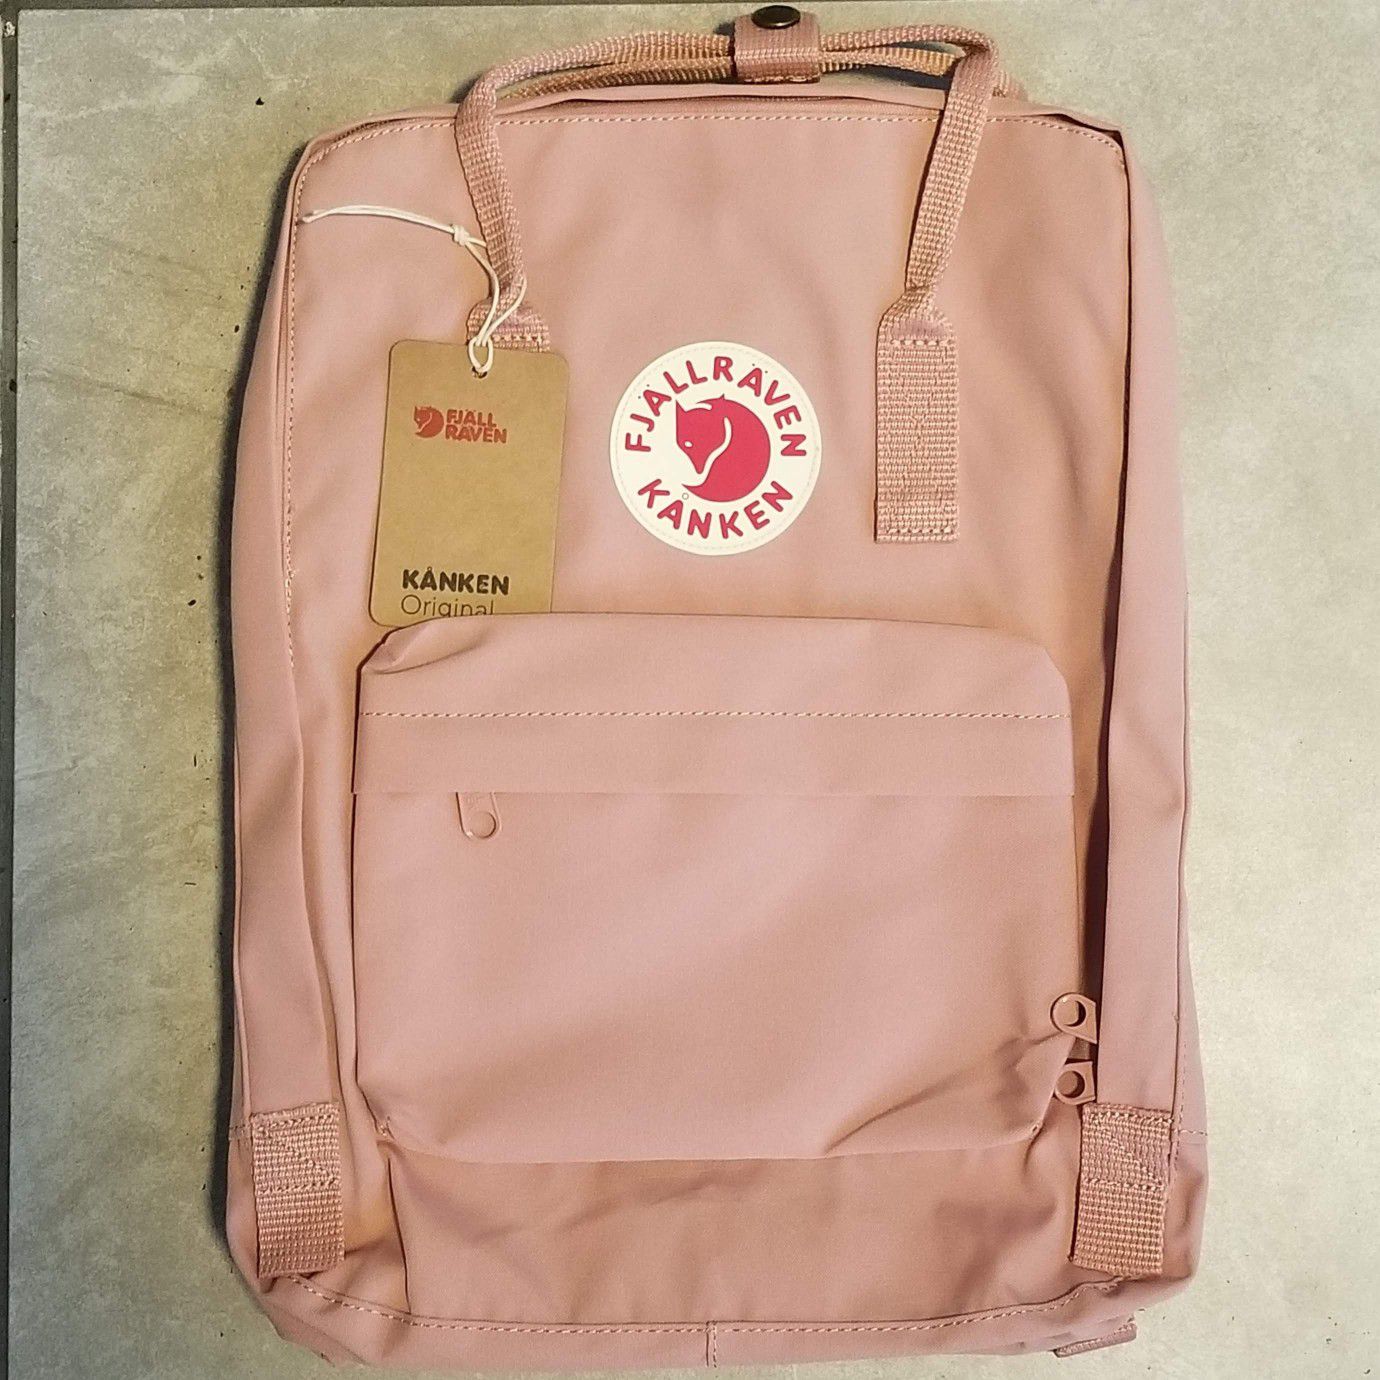 BRAND NEW PINK FJALLRAVEN KANKEN BACKPACK CLASSIC 16L WITH TAGS